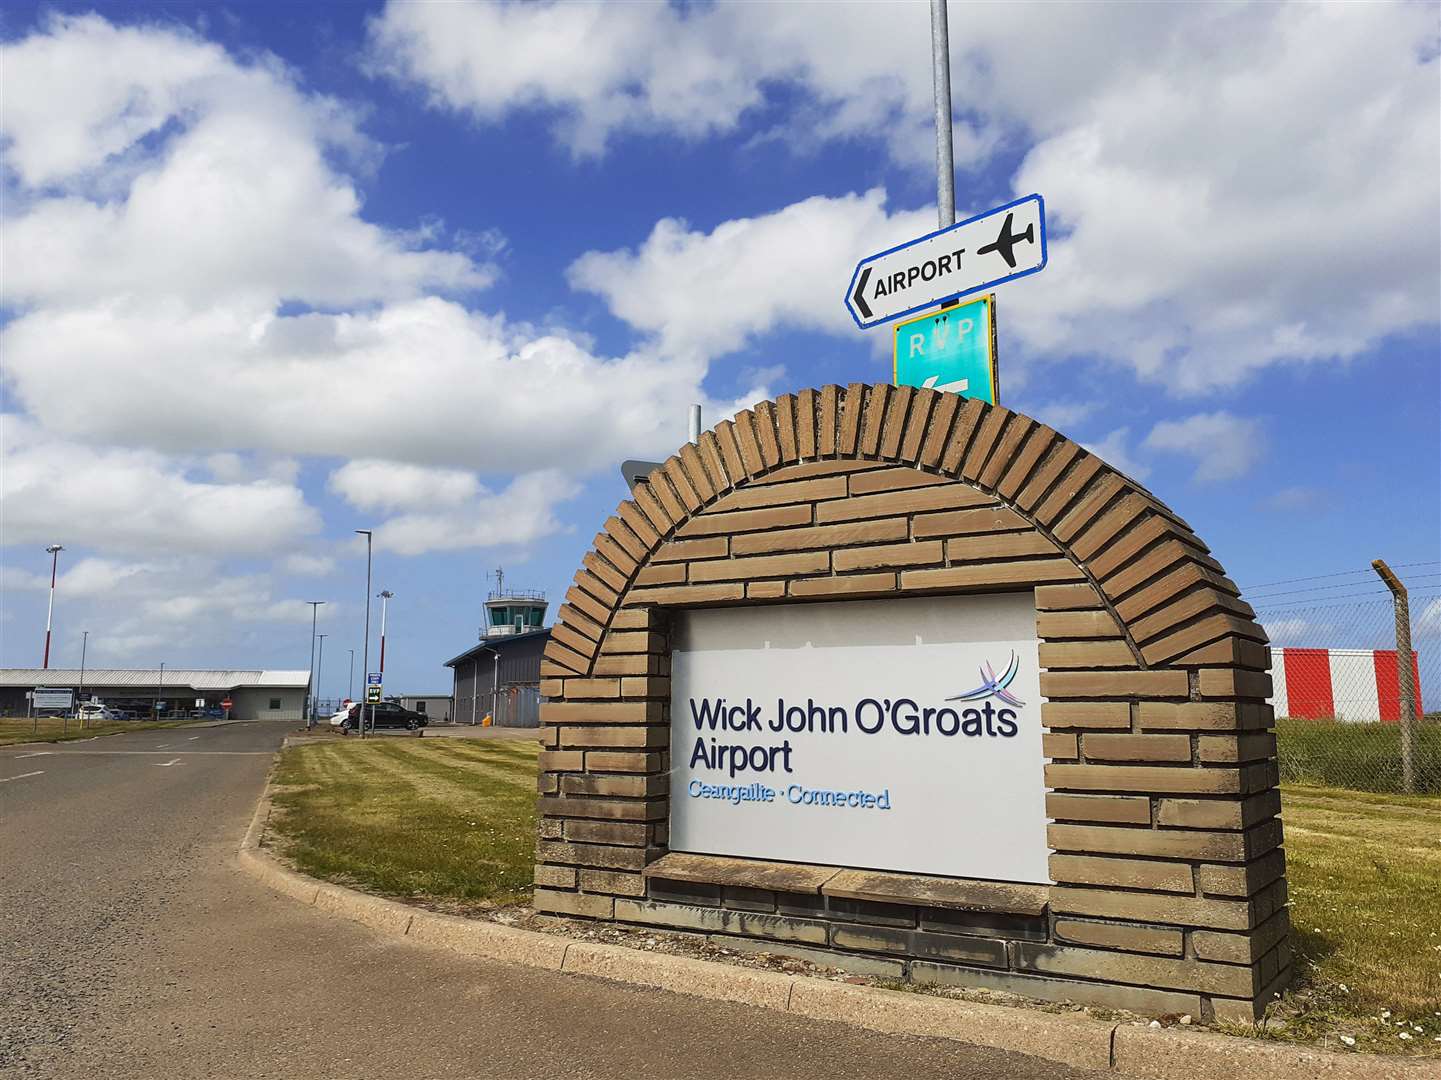 A case has been made for a public service obligation for flights from Wick John O'Groats Airport.